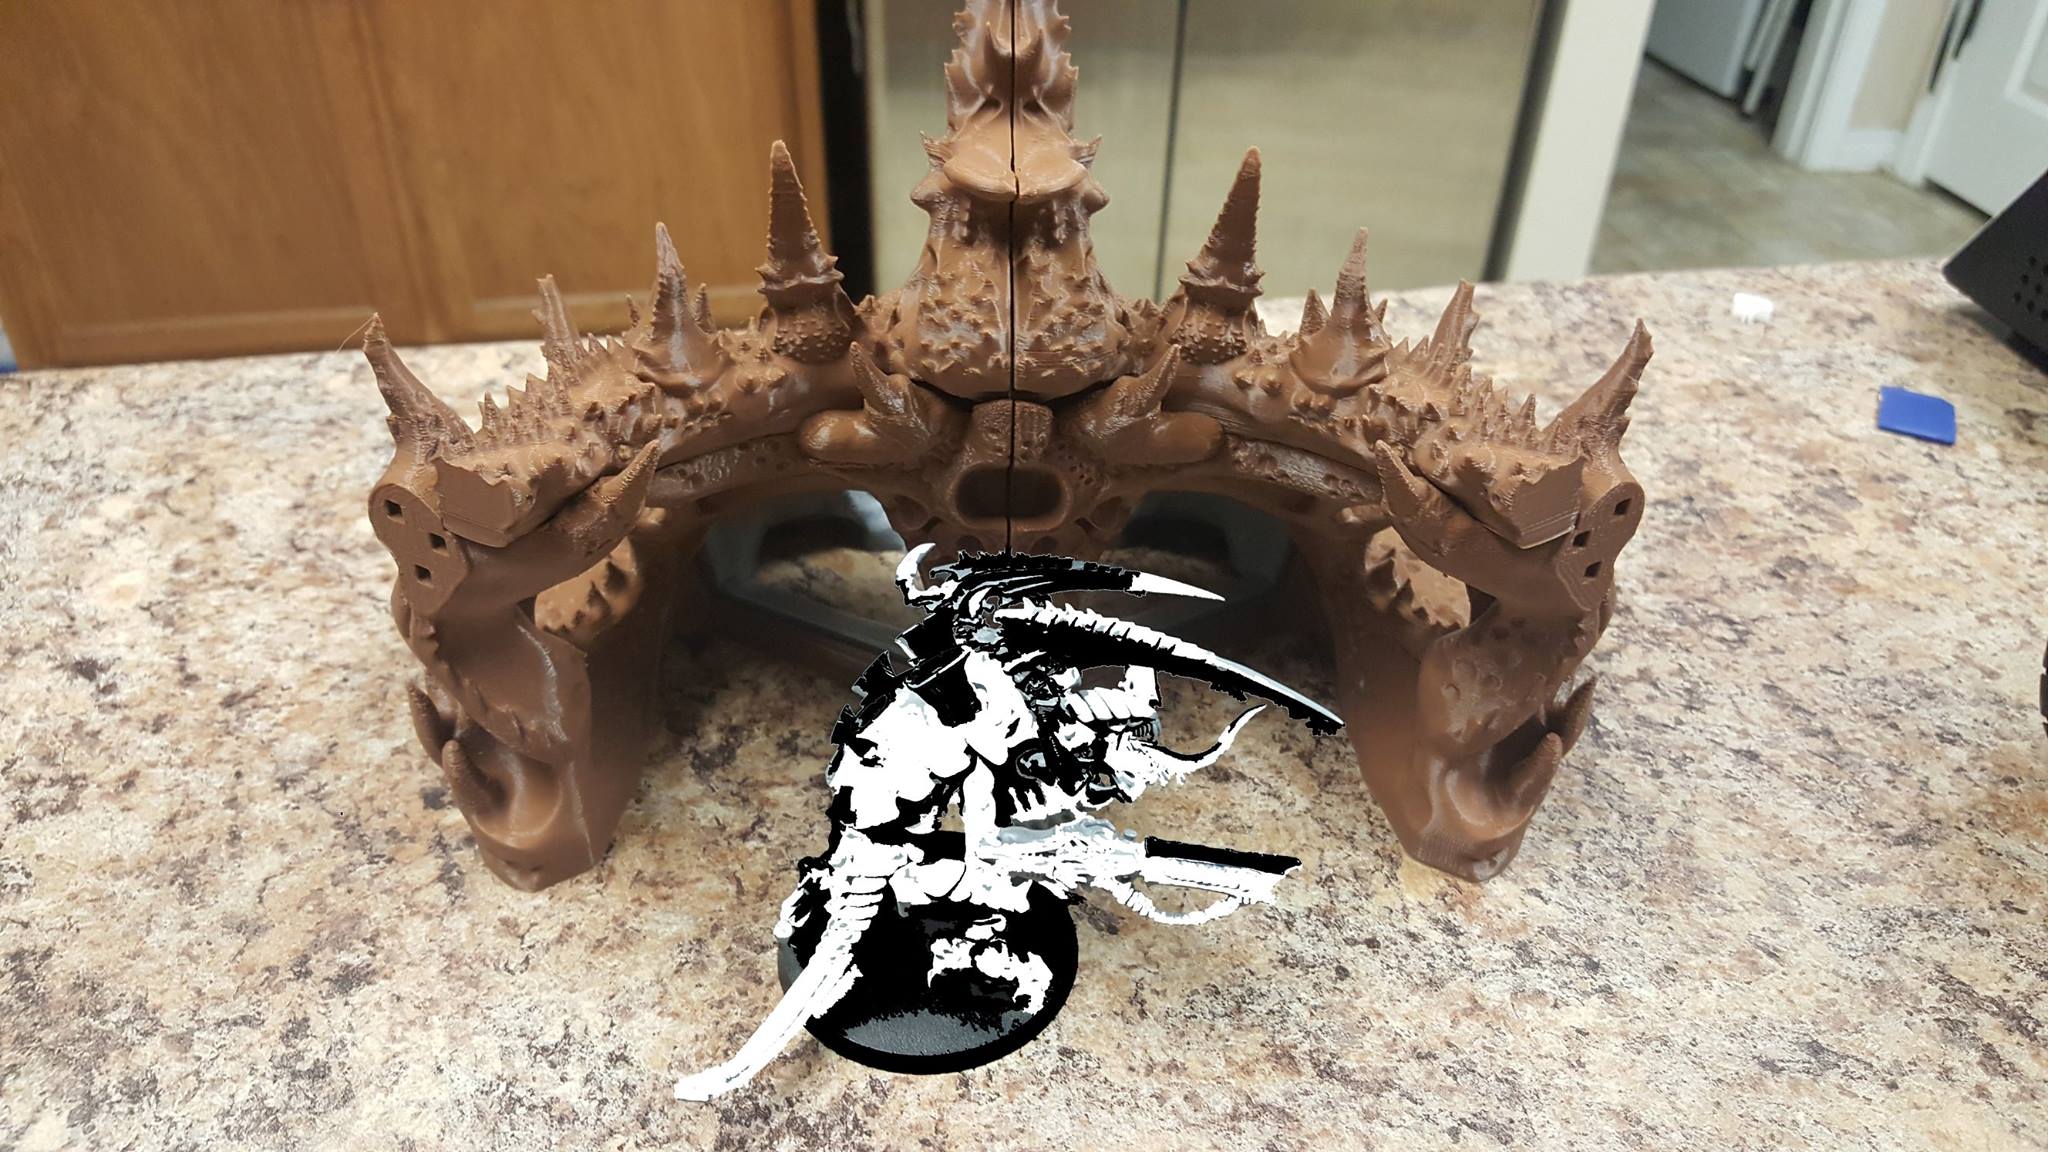 Thorn Hive Mega Maw - 2 with Tyranid for scale